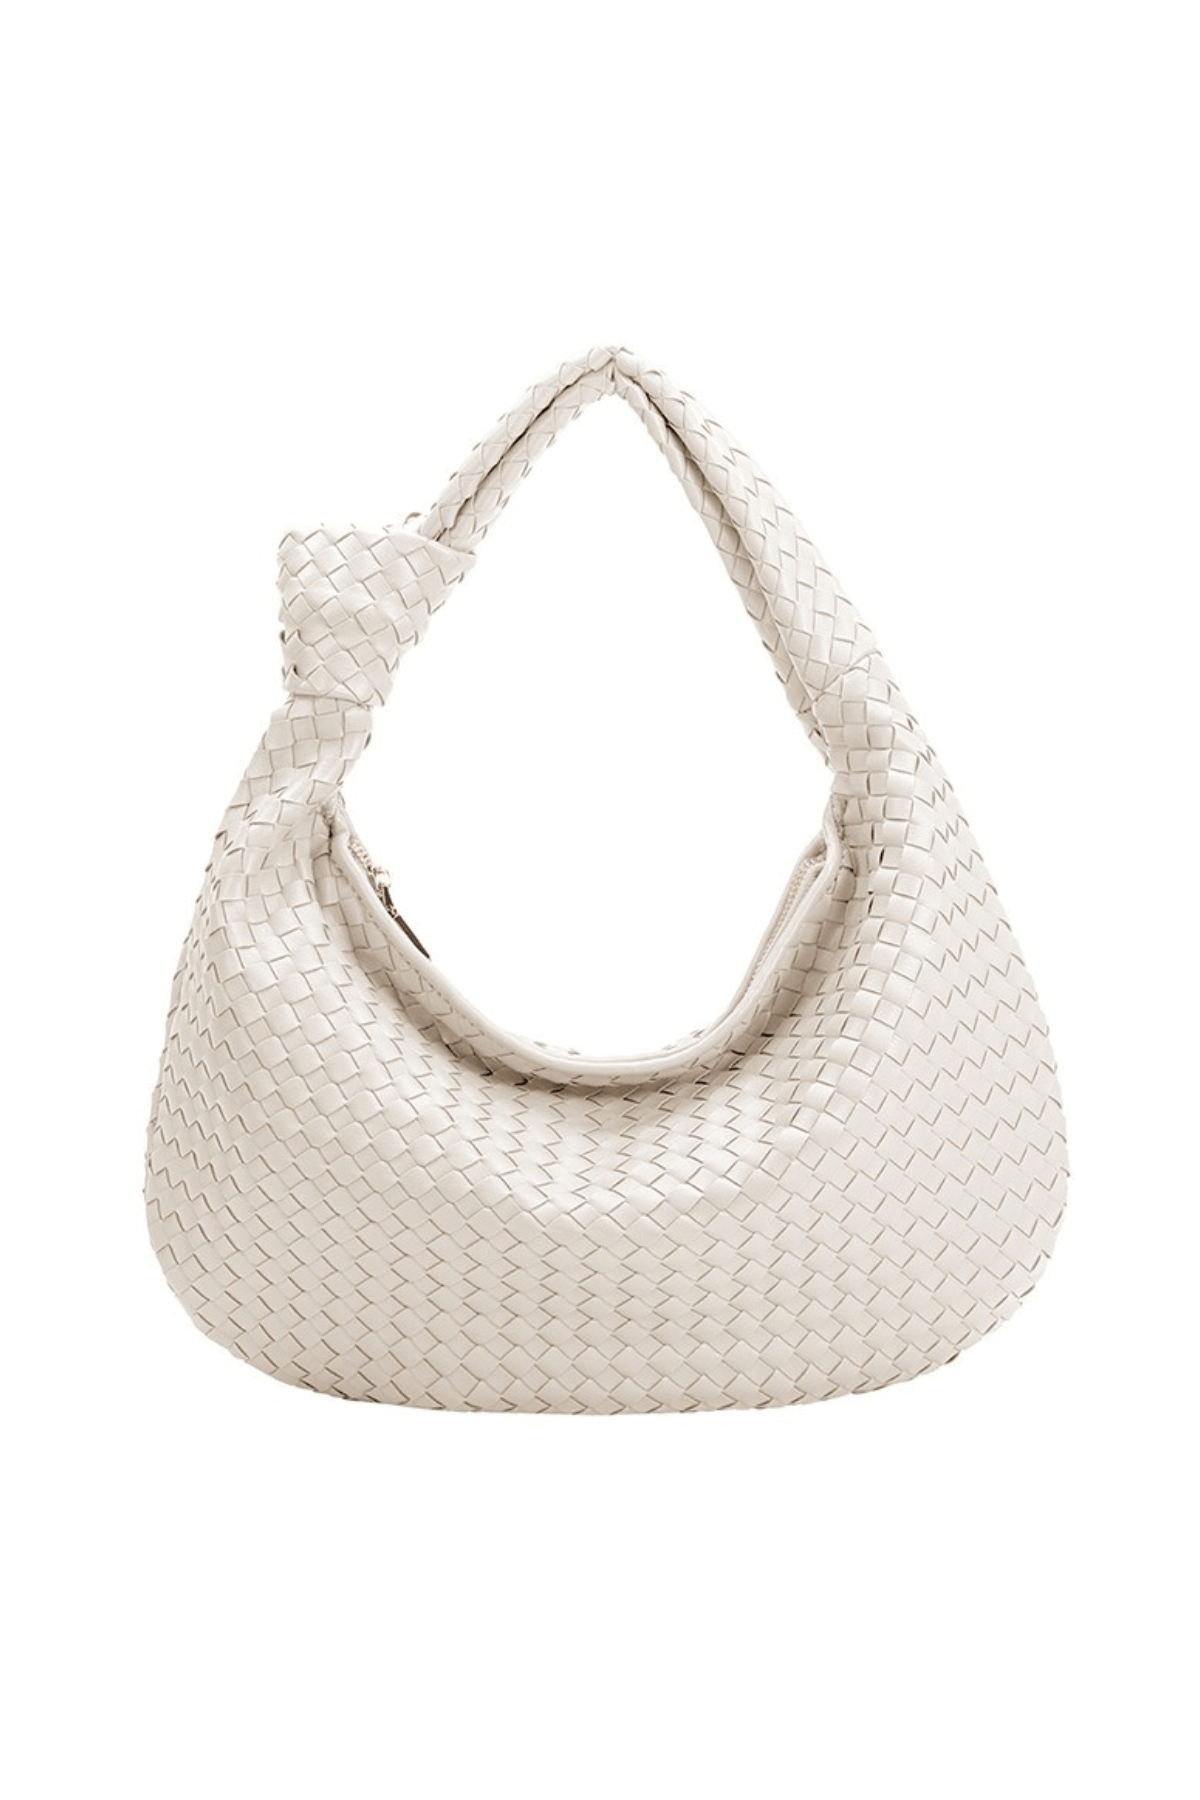 Melie Bianco Knotted Woven Vegan Leather Large Bag